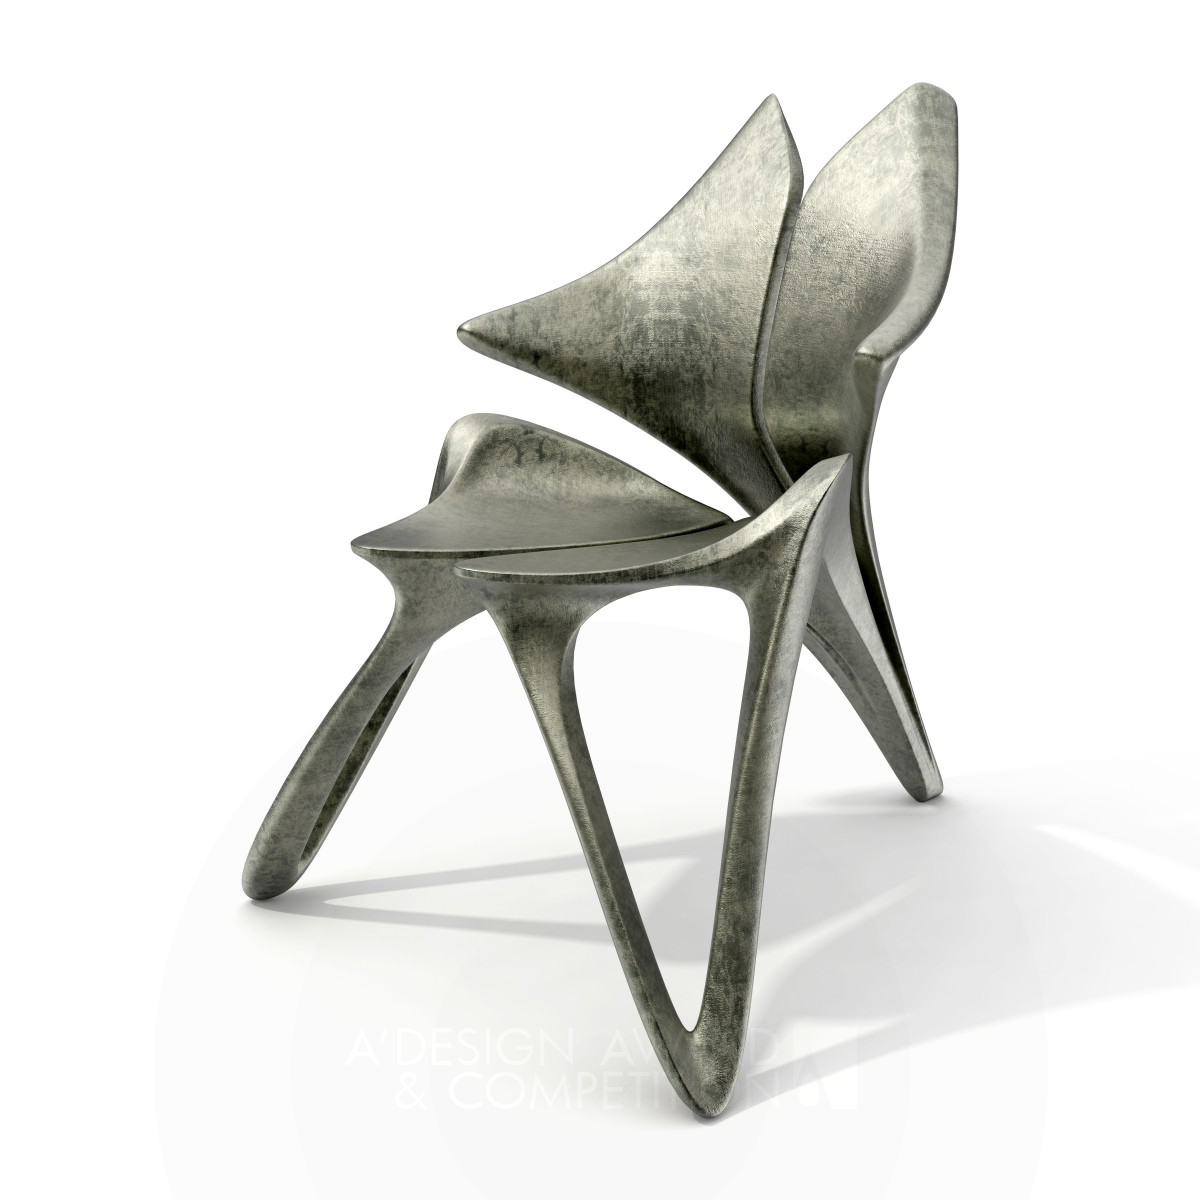 Wei Jingye wins Bronze at the prestigious A' Furniture Design Award with Blooming Leisure Chair.